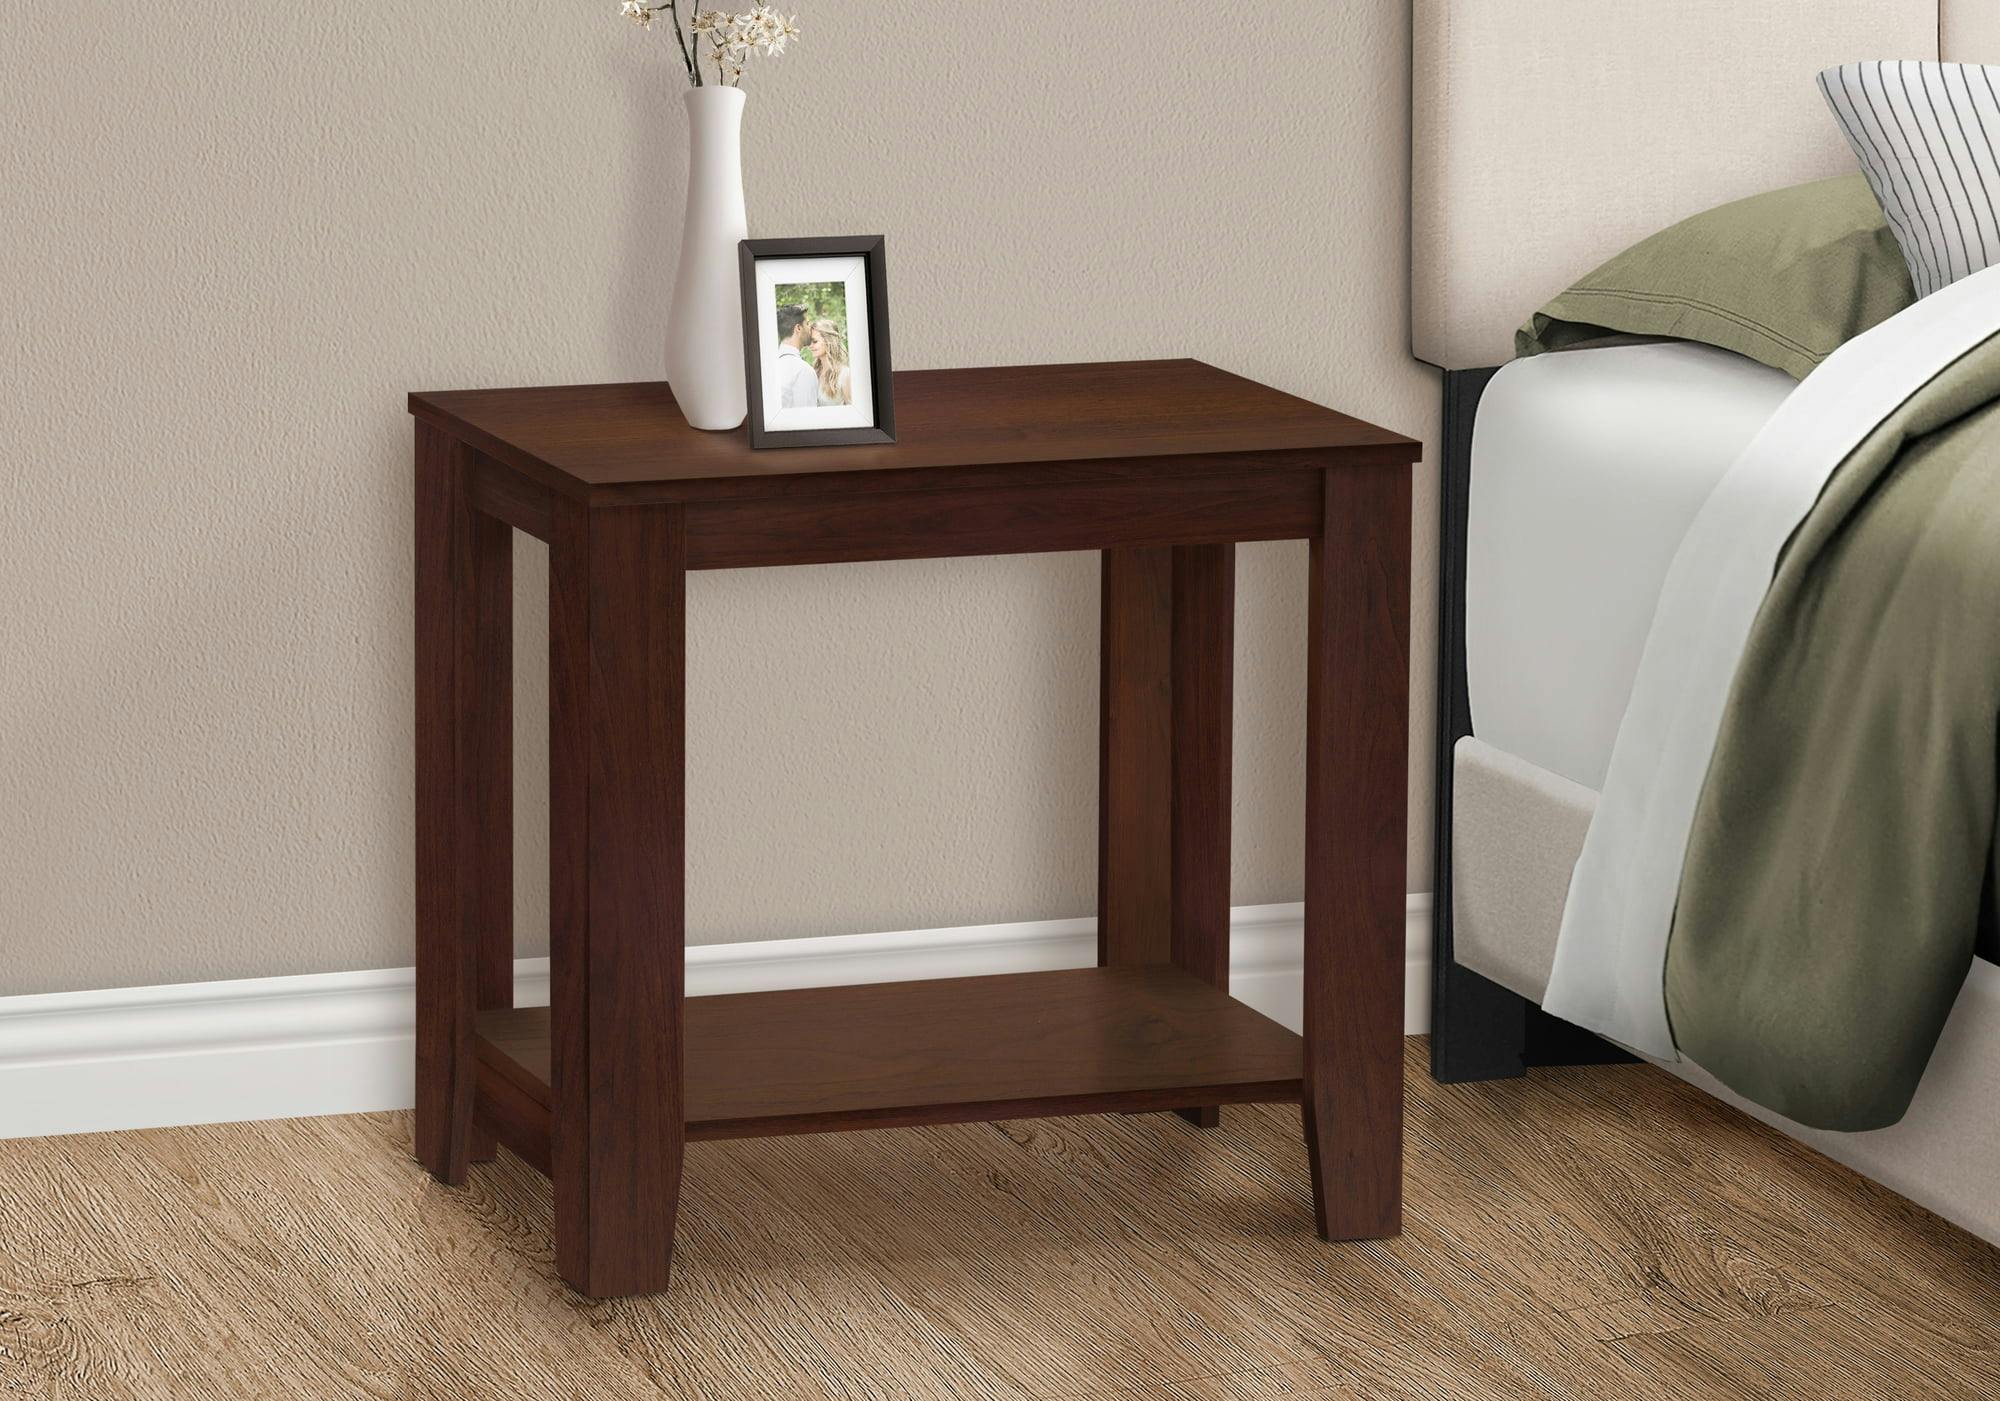 Contemporary Cherry Wood Rectangular Side Table with Shelf